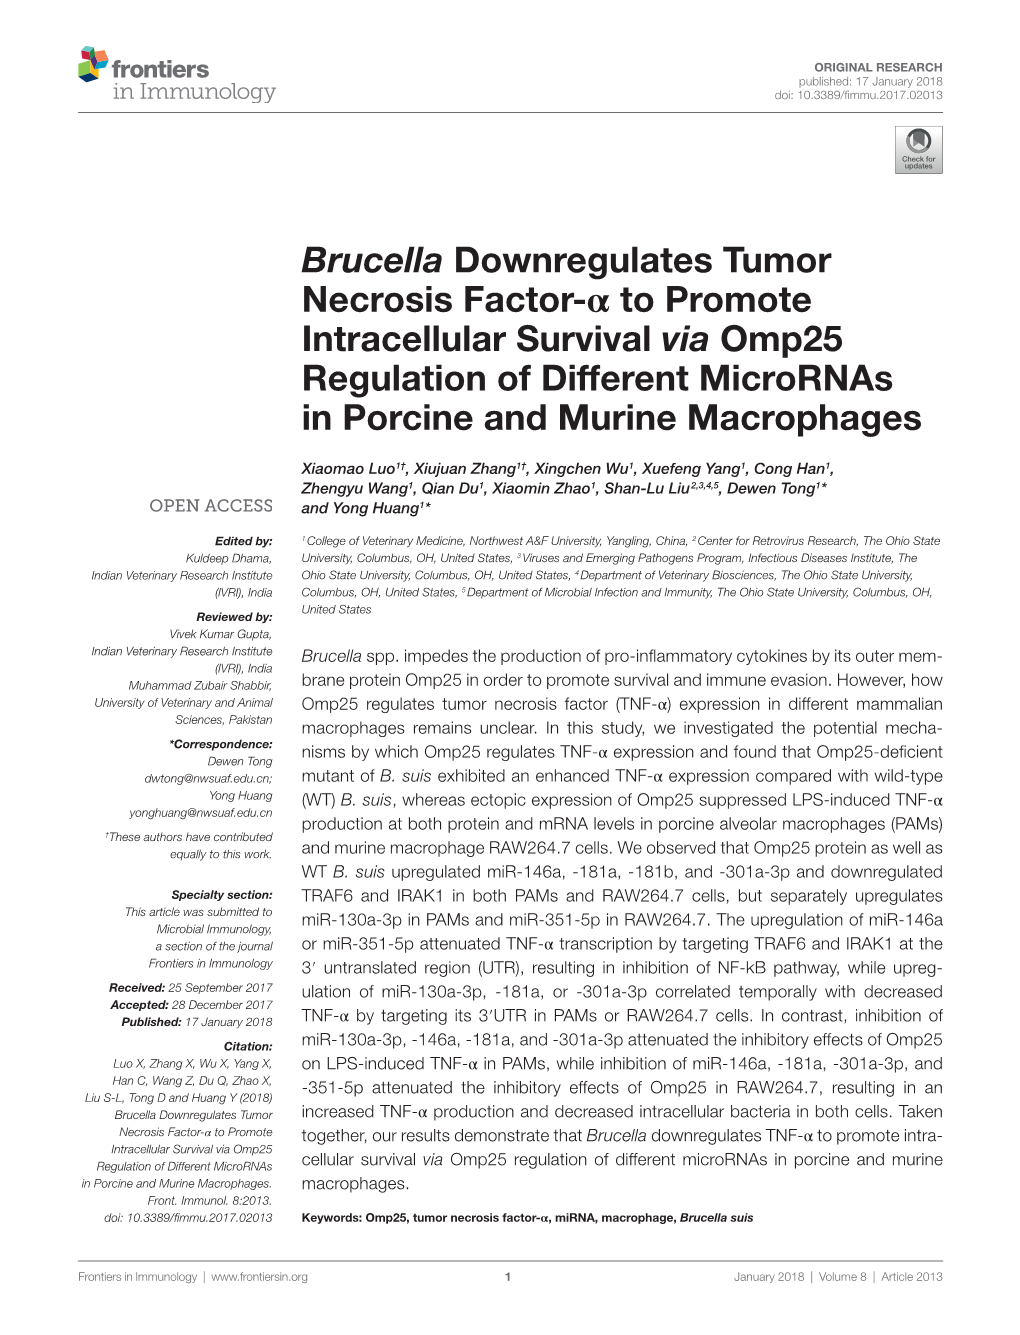 Brucella Downregulates Tumor Necrosis Factor-Α to Promote Intracellular Survival Via Omp25 Regulation of Different Micrornas in Porcine and Murine Macrophages